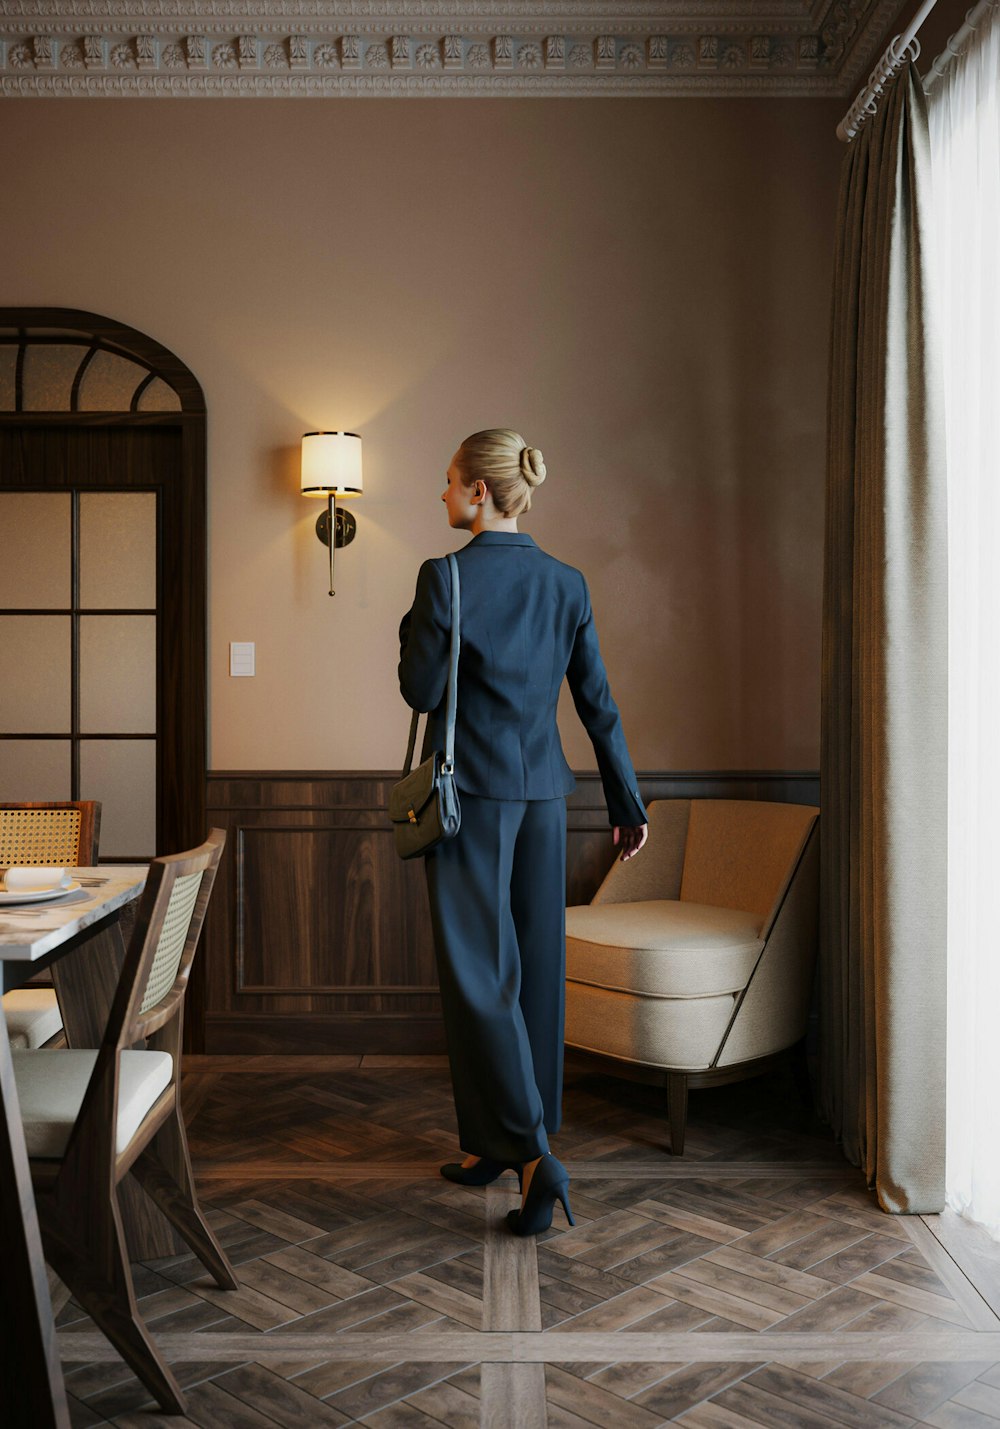 a woman in a blue suit standing in a room